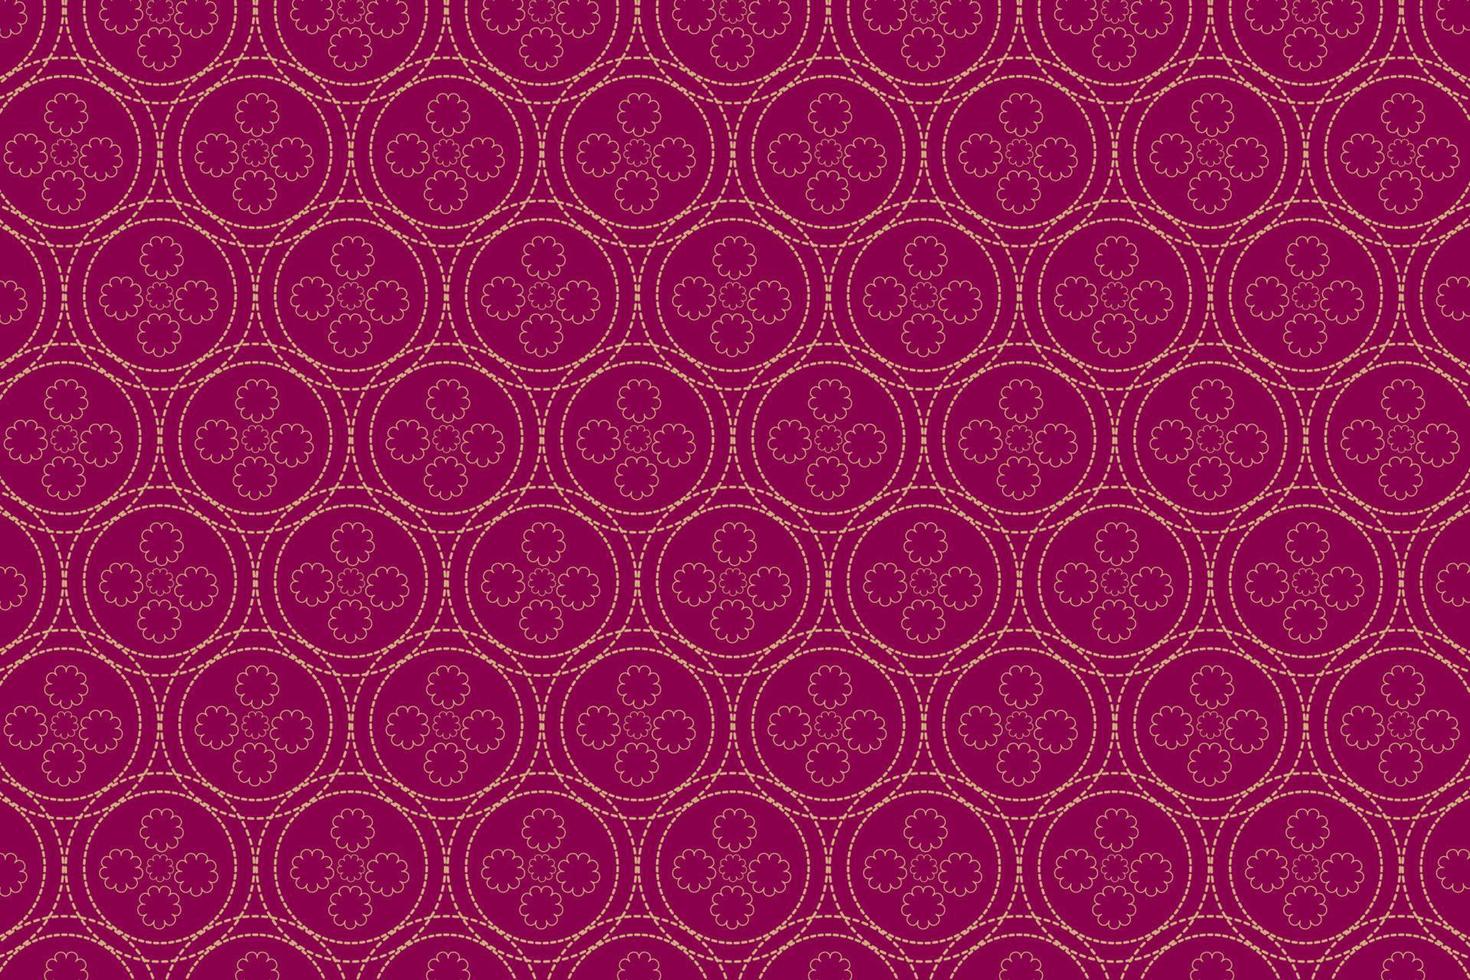 Pattern with geometric elements in pink tones abstract background vector